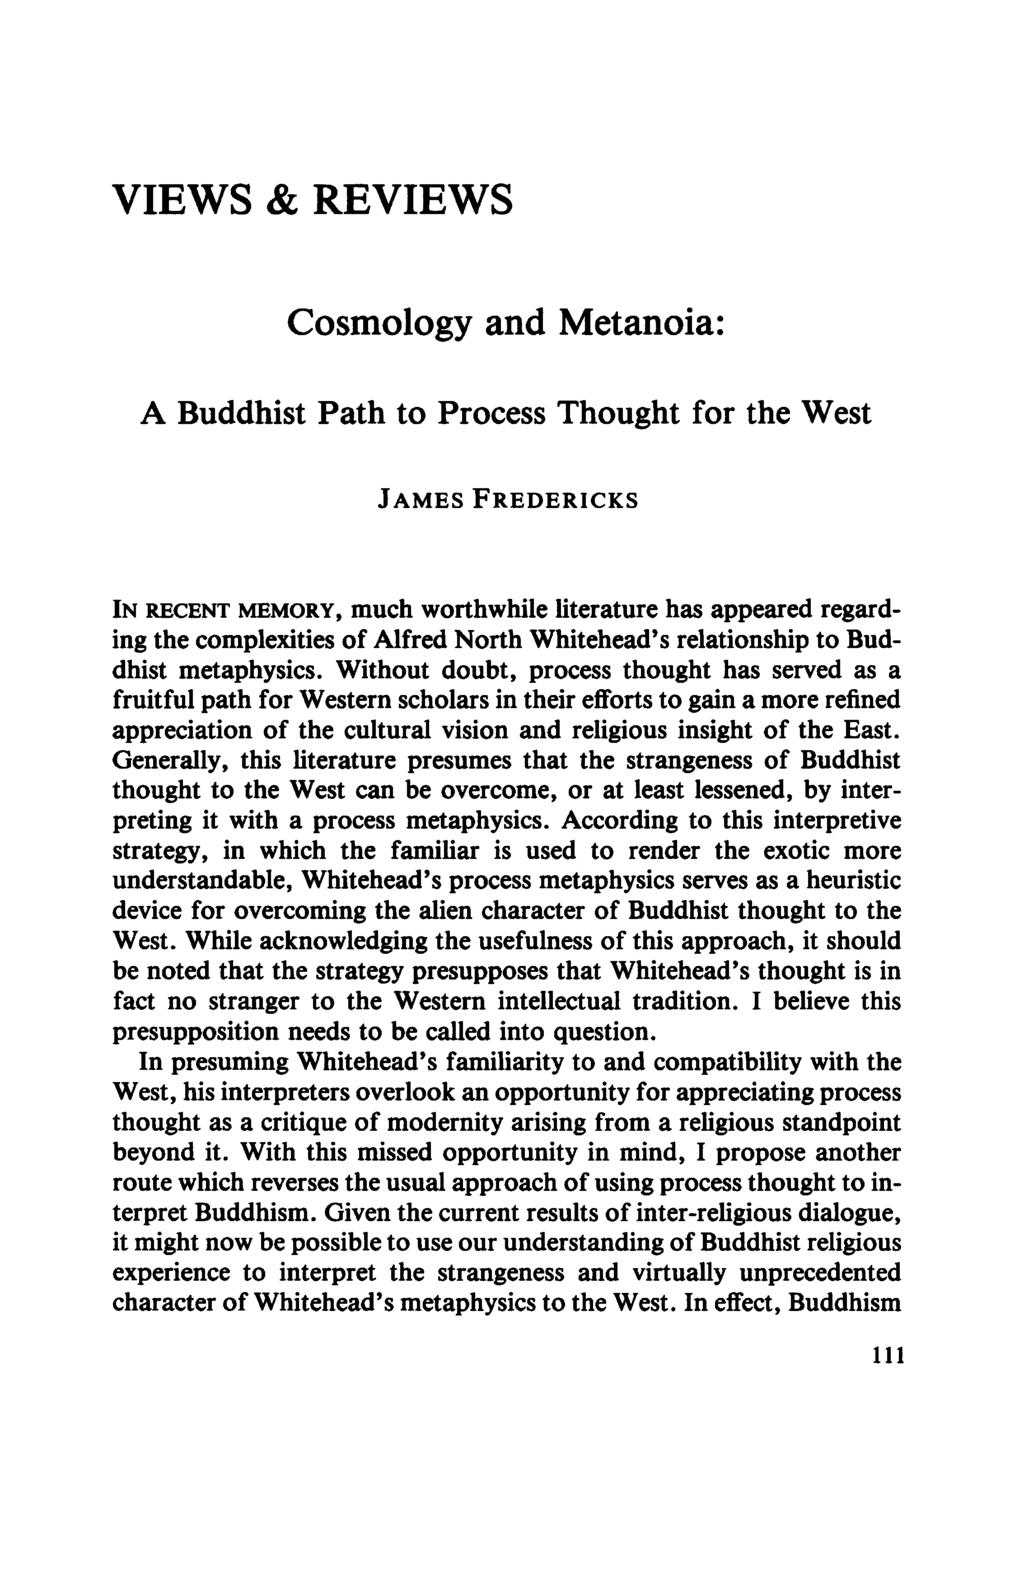 VIEWS & REVIEWS Cosmology and Metanoia: A Buddhist Path to Process Thought for the West JAMES FREDERICKS IN RECENT MEMORY, much worthwhile literature has appeared regarding the complexities of Alfred